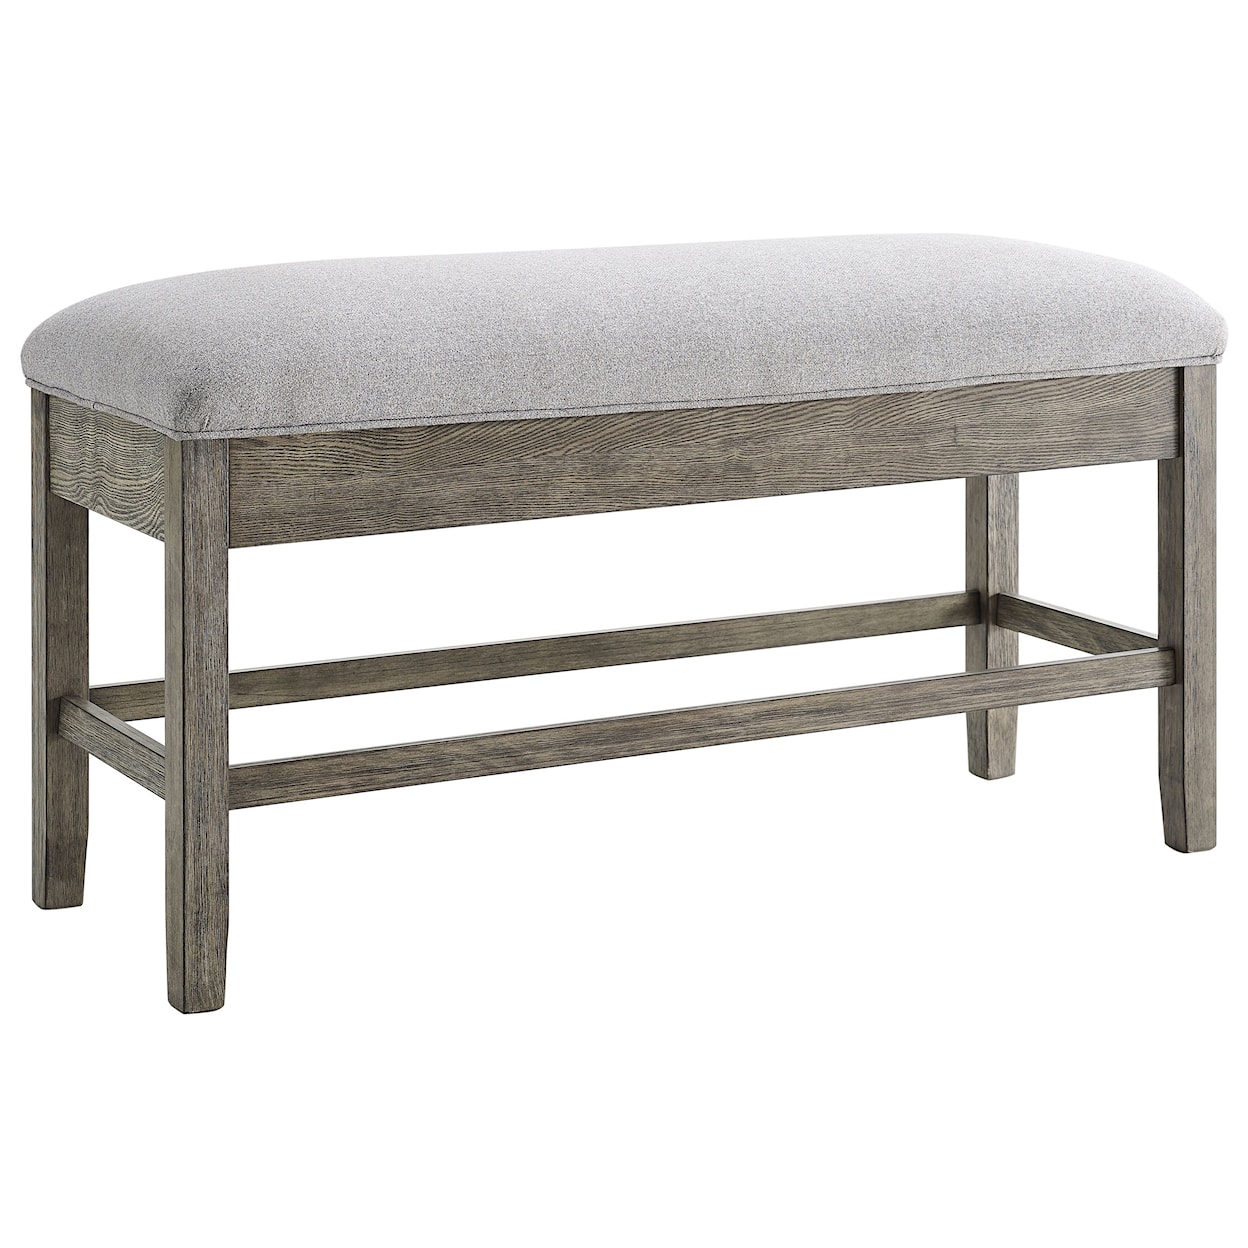 Steve Silver Ethan Ethan Counter Height Storage Bench